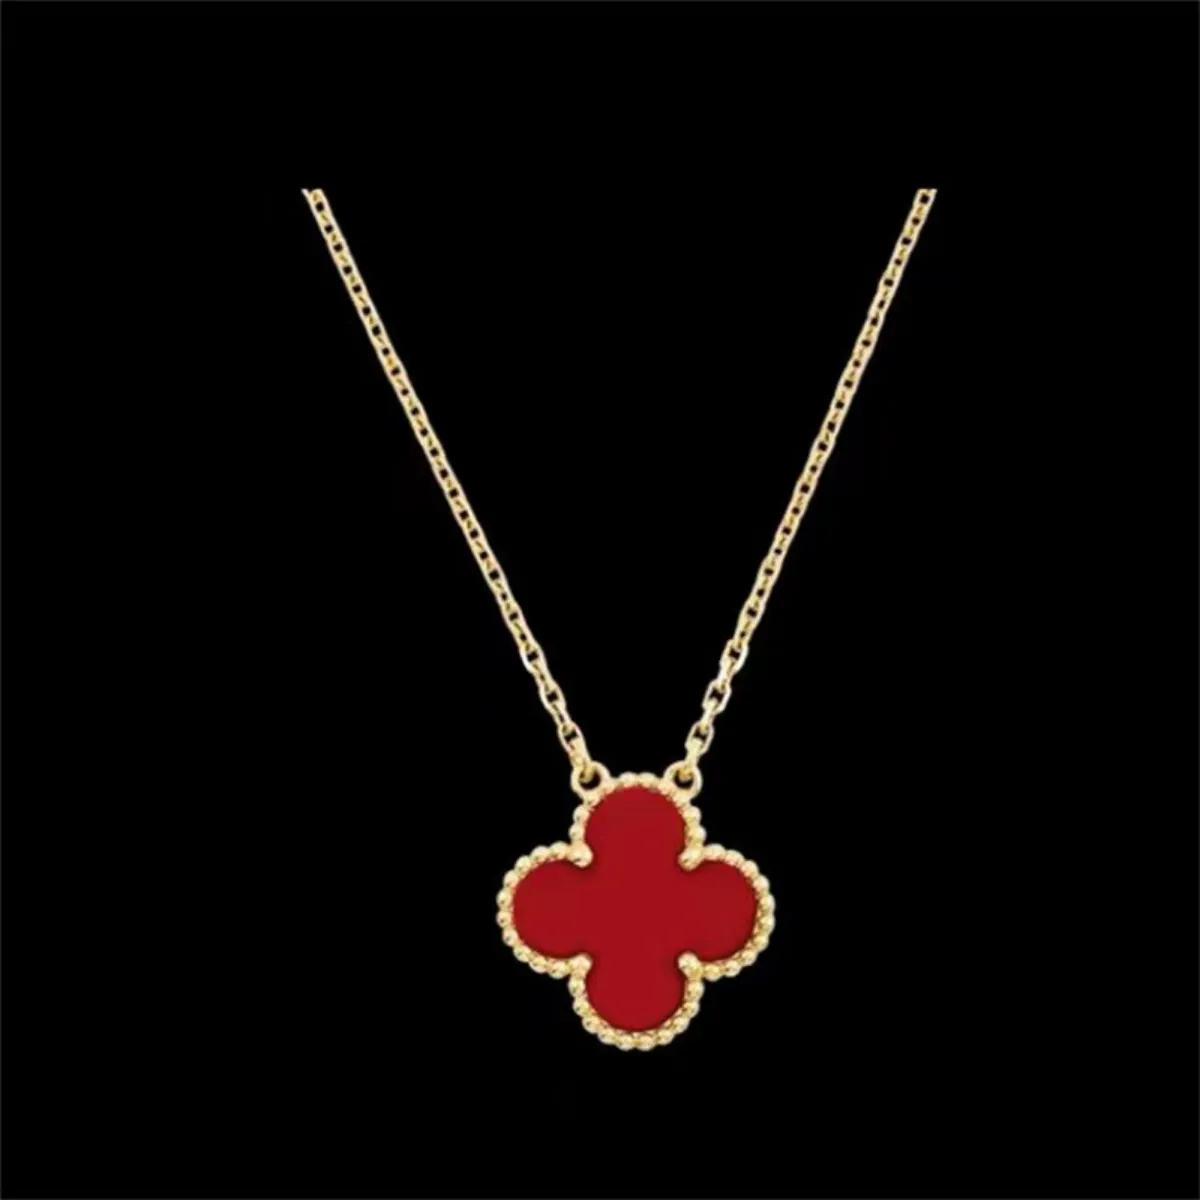 Fashion brand designer necklace classics flowers Four-leaf clover necklace womens luxury designer jewelry gift